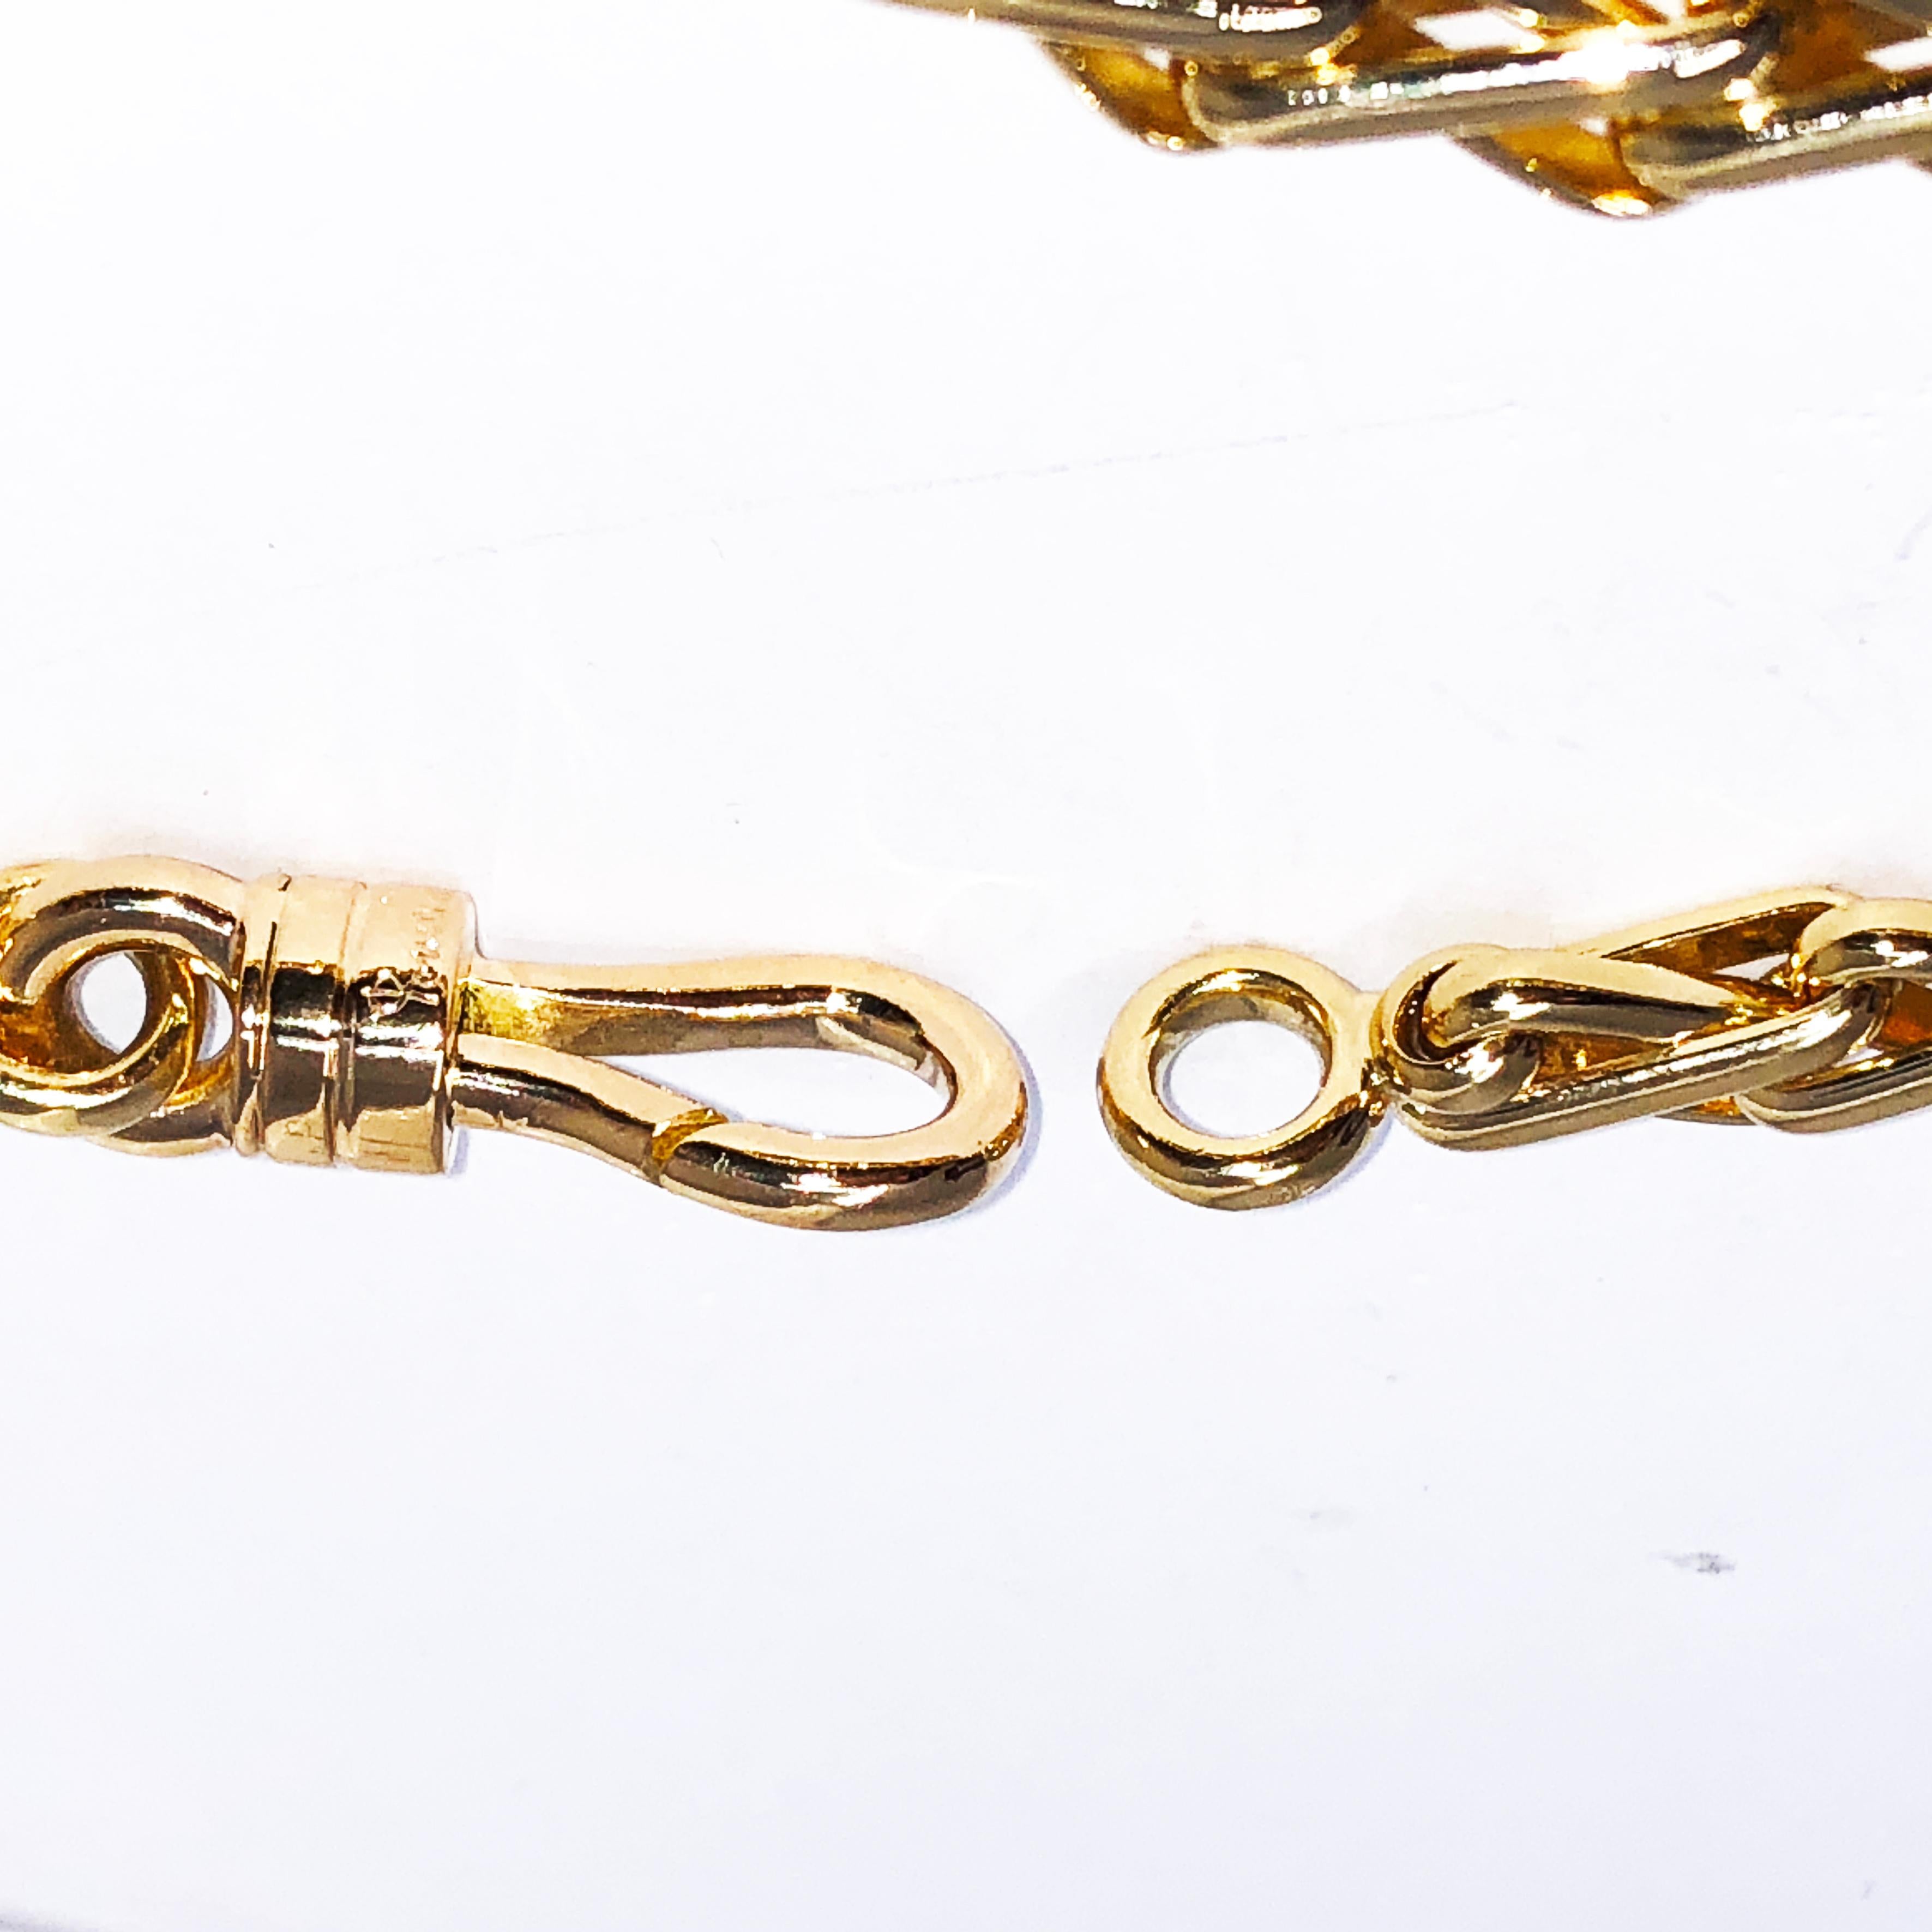 Original 1980 One-of-a-Kind Pomellato 18K Solid Yellow Gold Long Chain Necklace 3